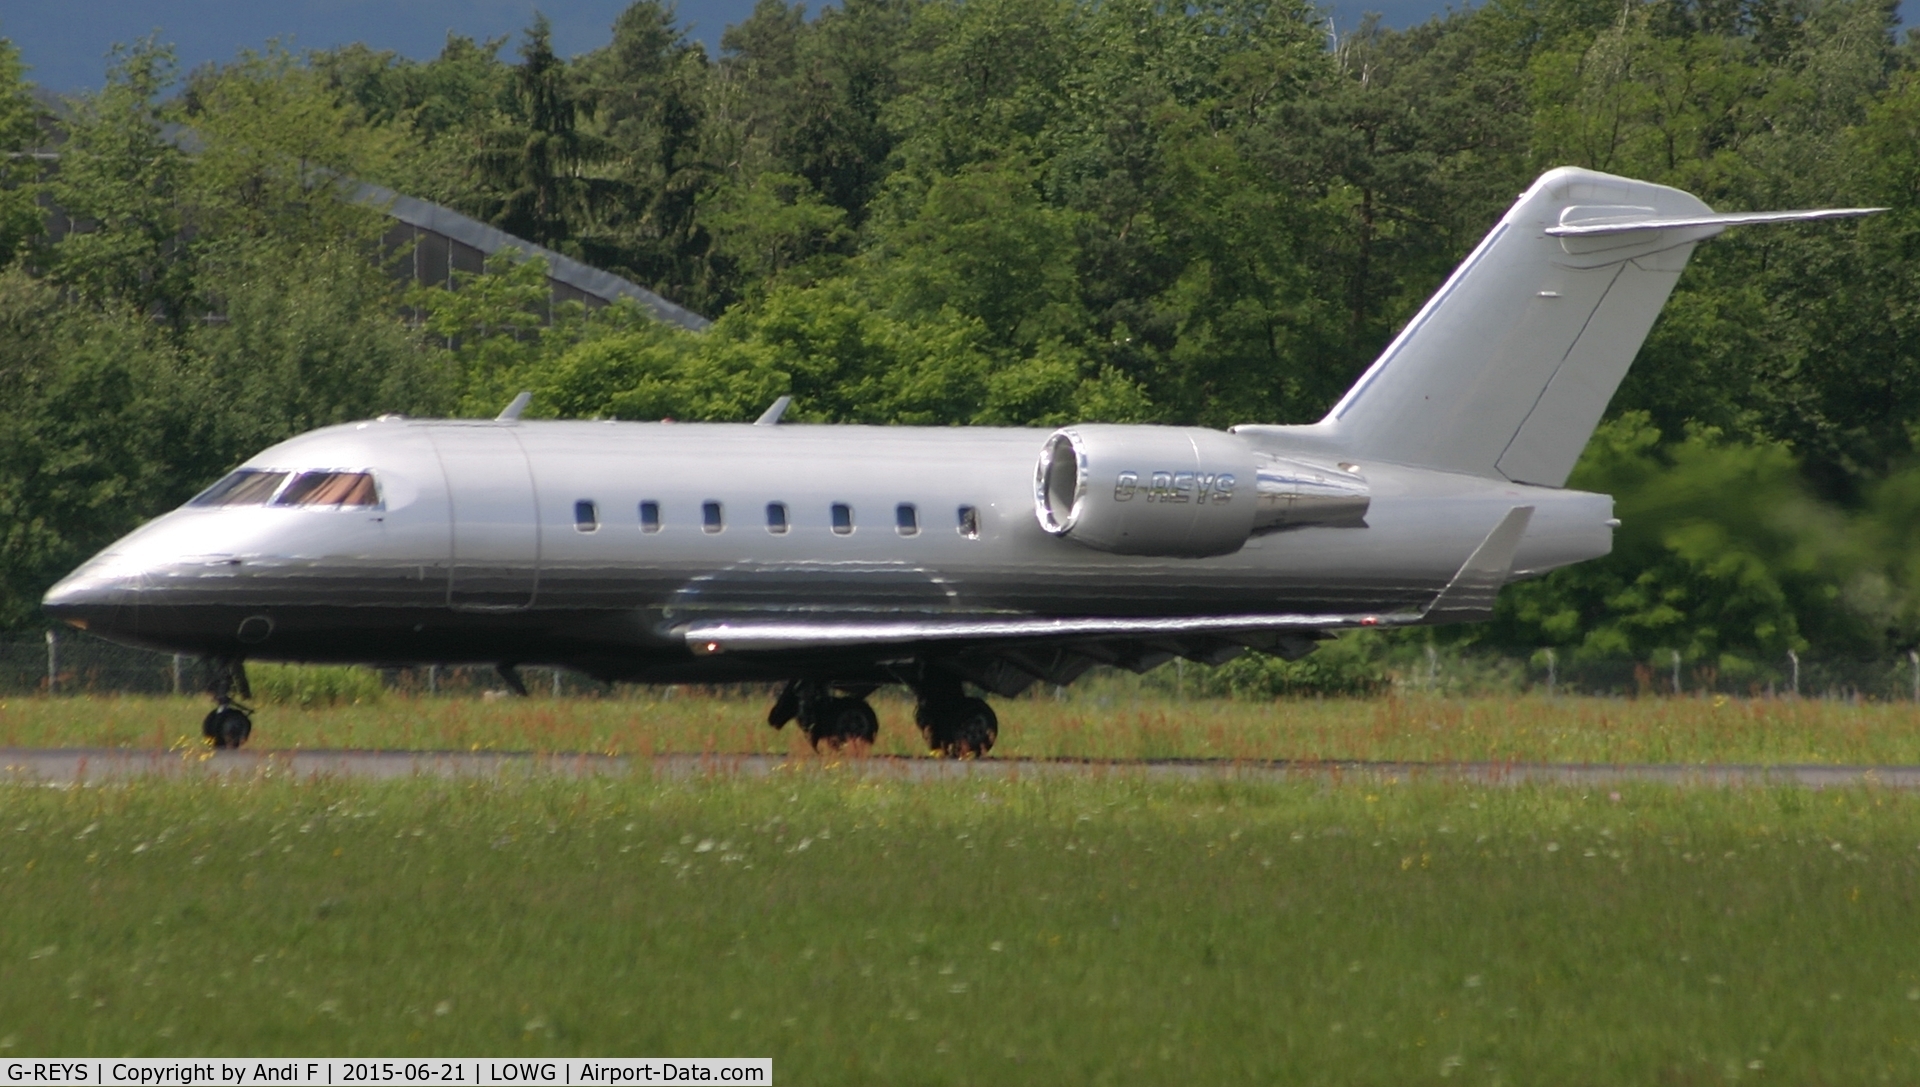 G-REYS, 2000 Bombardier Challenger 604 (CL-600-2B16) C/N 5467, Greyscape Ltd.  Canadair CL-600-2B16 Challenger 604